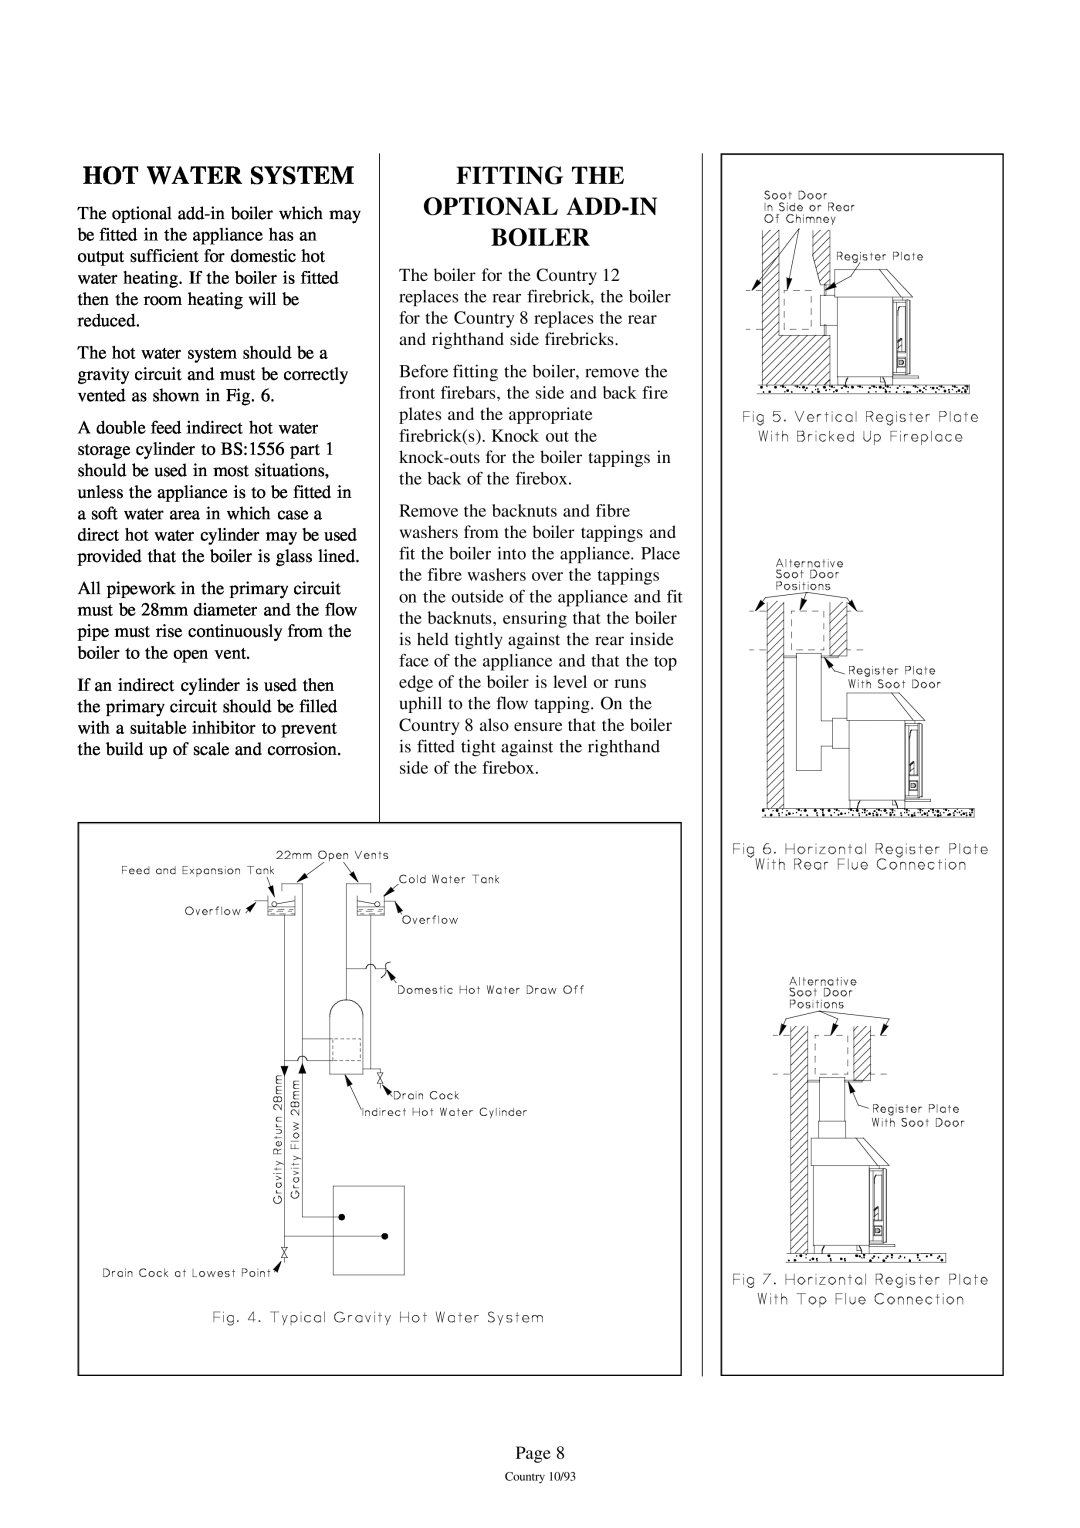 Charnwood Country 8, Country 12 installation instructions Hot Water System, Fitting The Optional Add-In Boiler 